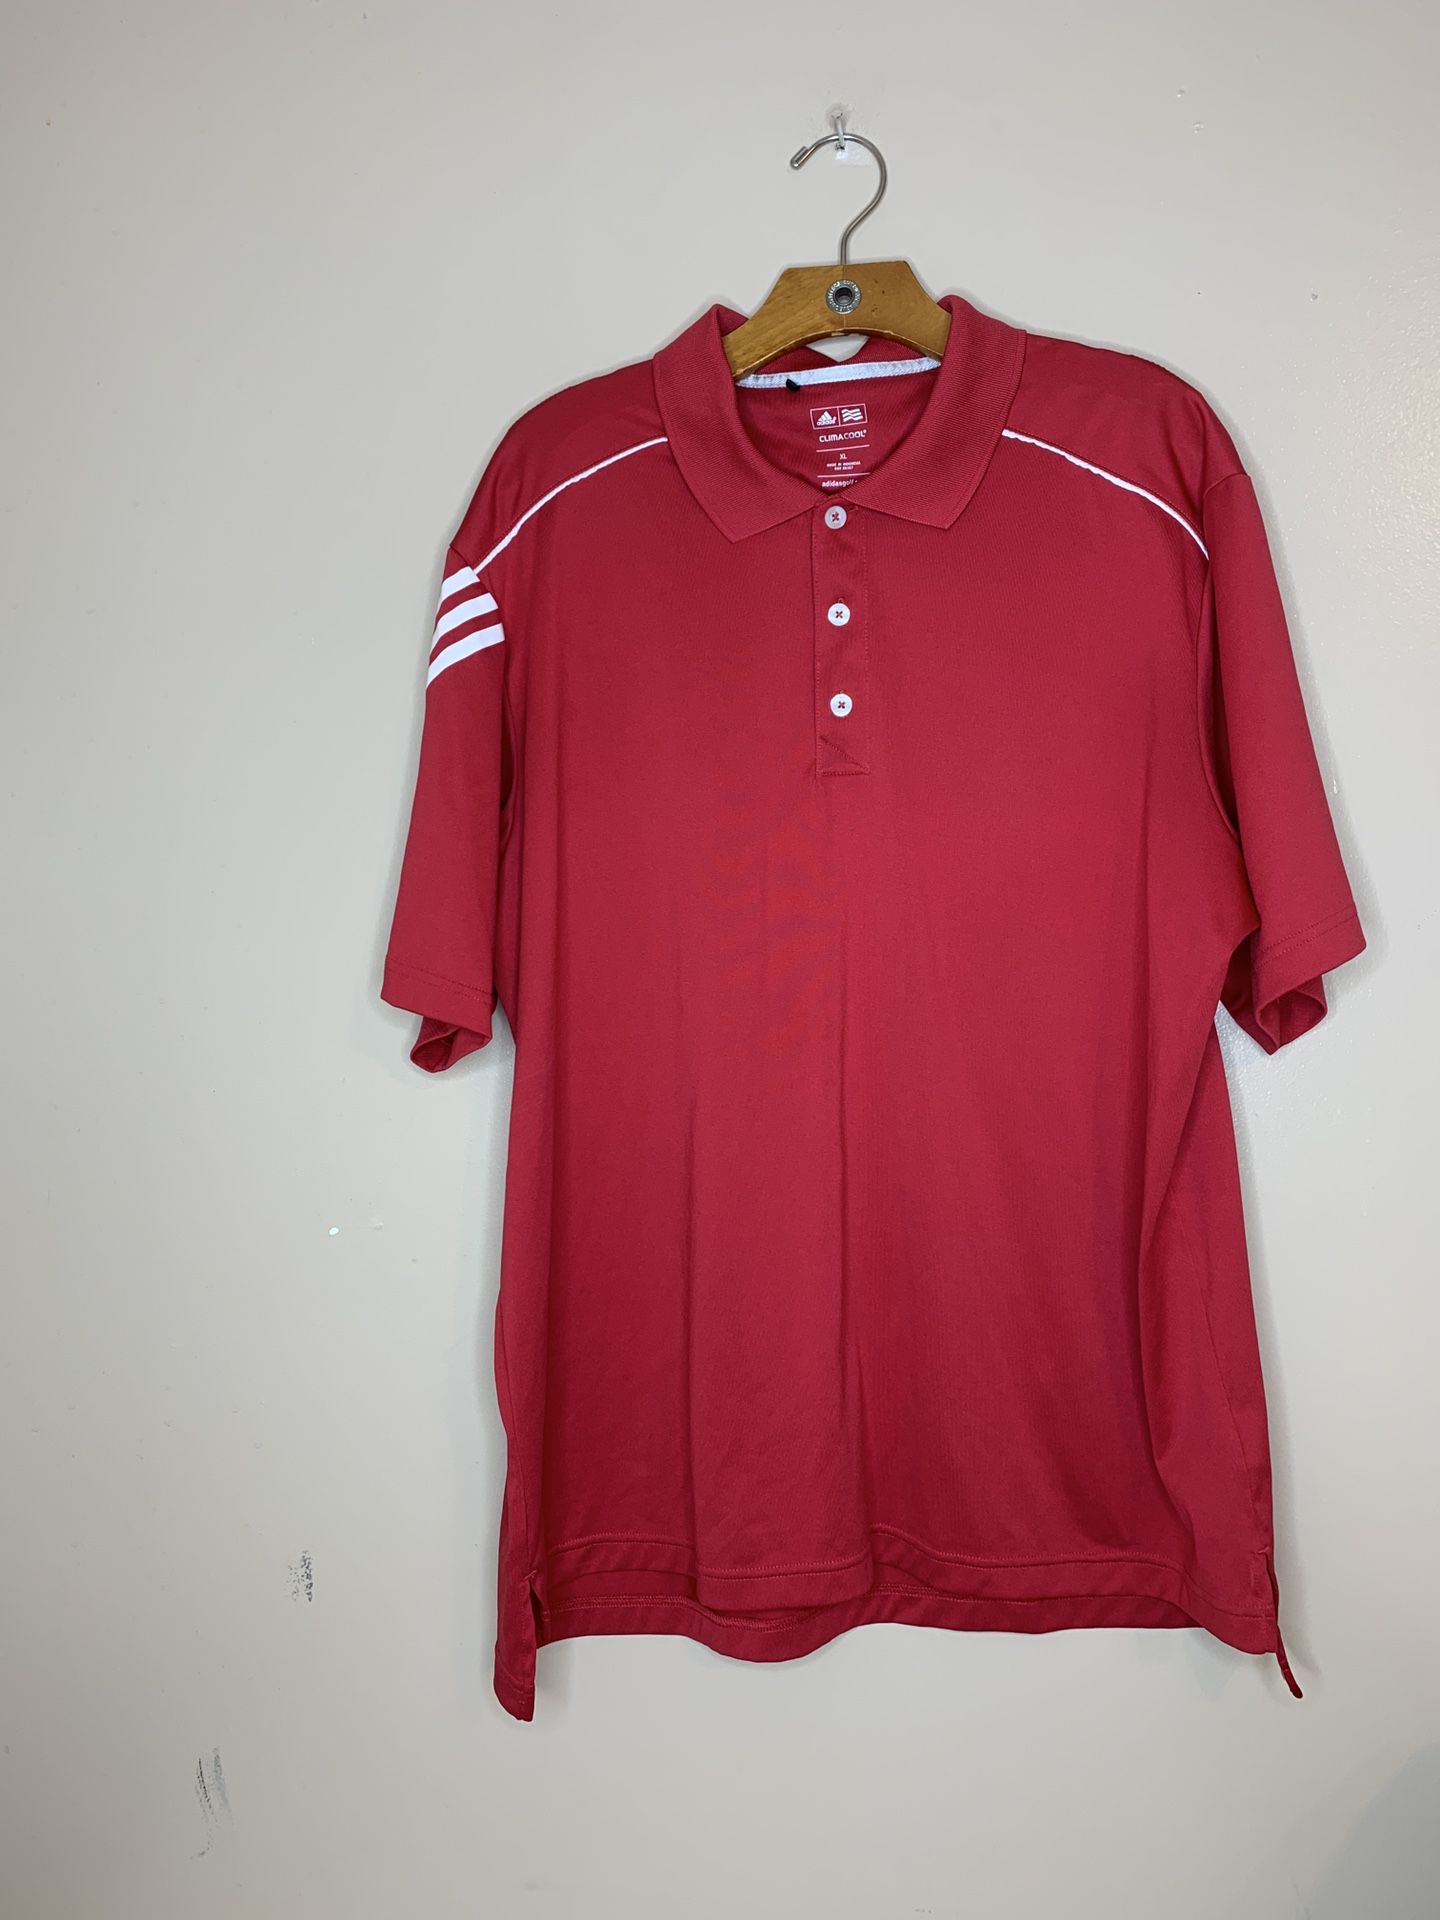 Adidas Clima Cool Striped Golf Lightweight Polo XL Pre-owned